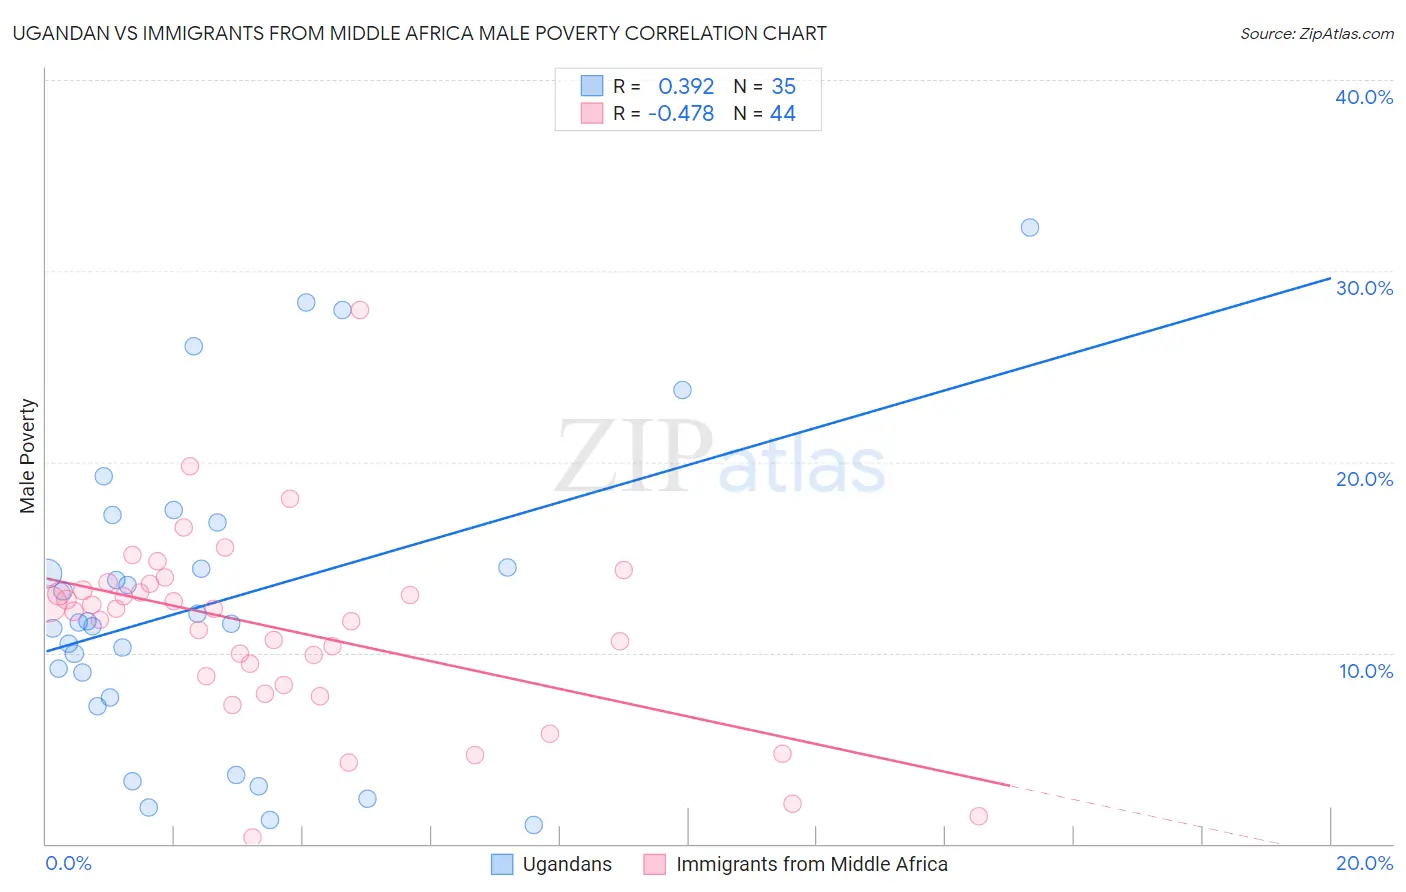 Ugandan vs Immigrants from Middle Africa Male Poverty